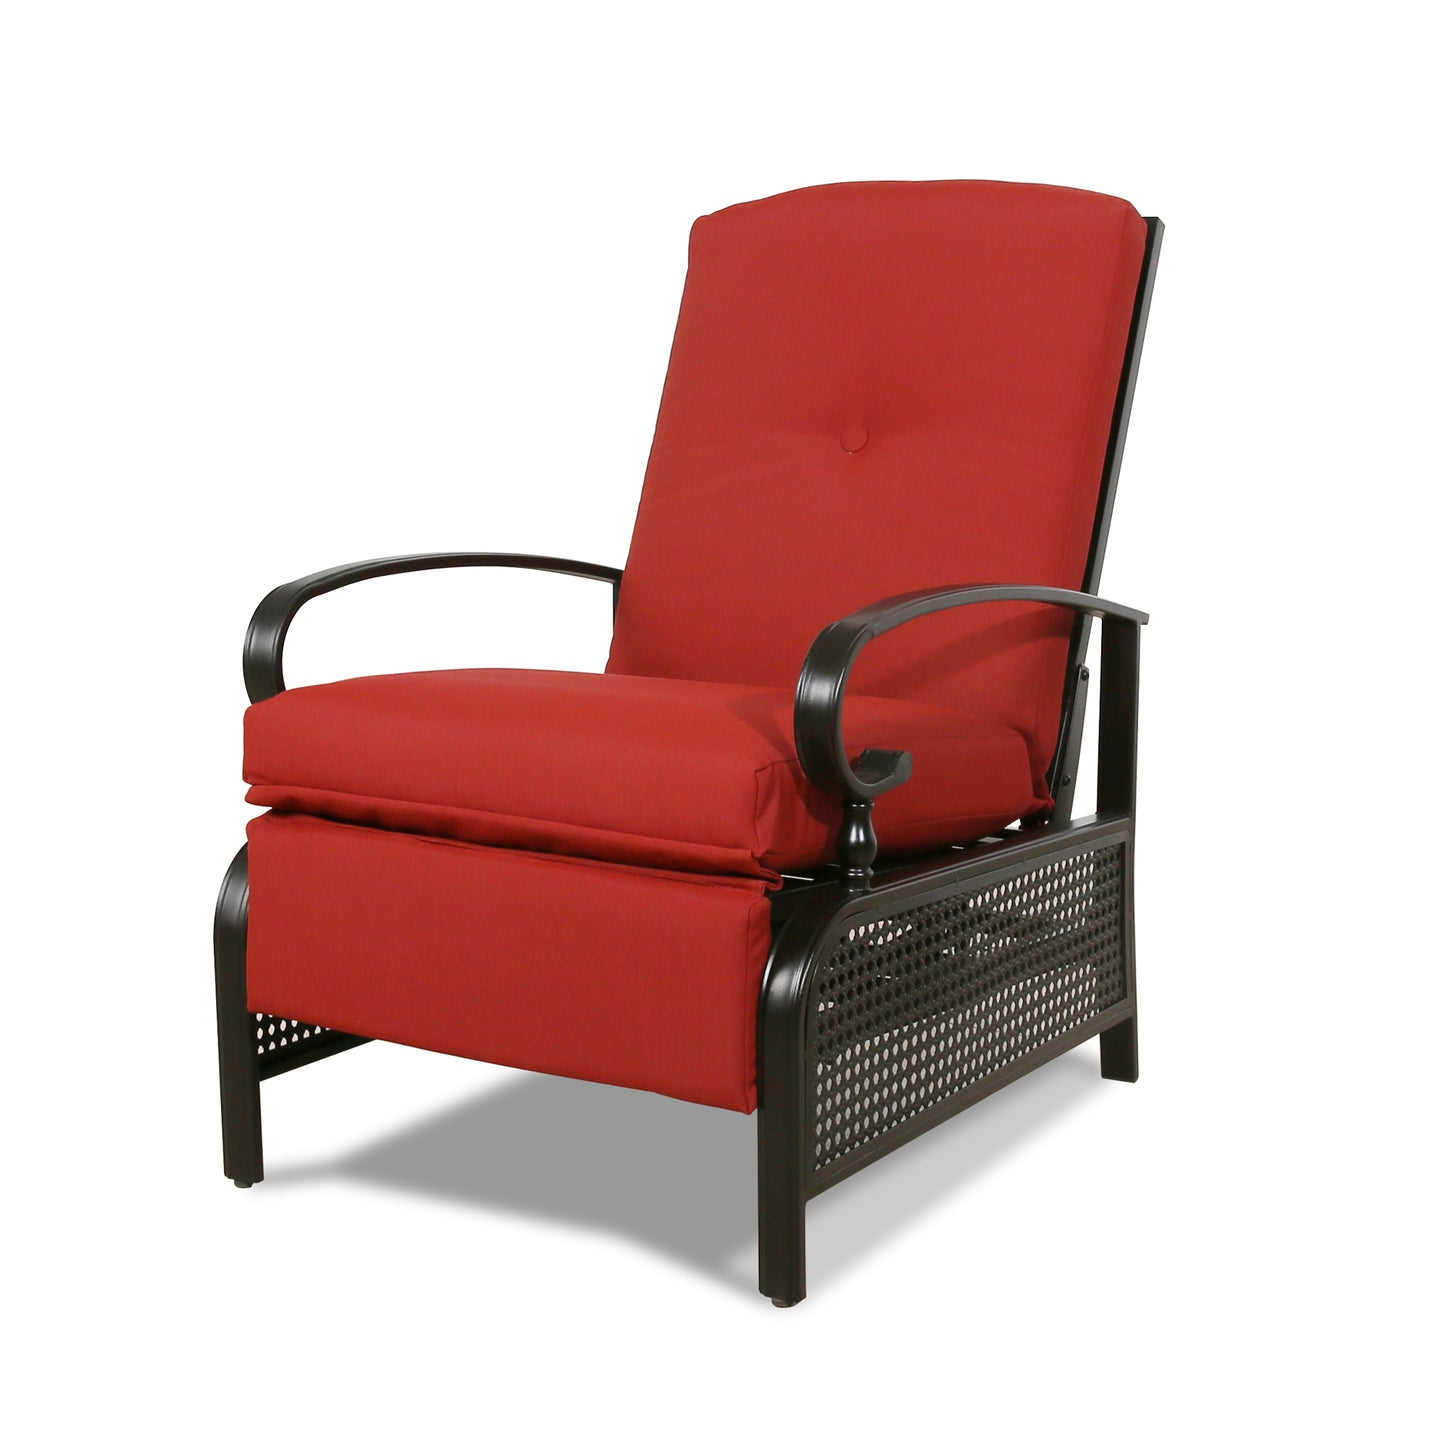 Patio Recliner Chair Automatic Adjustable Back Outdoor Lounge Chair with 100% Olefin Cushion (Red)